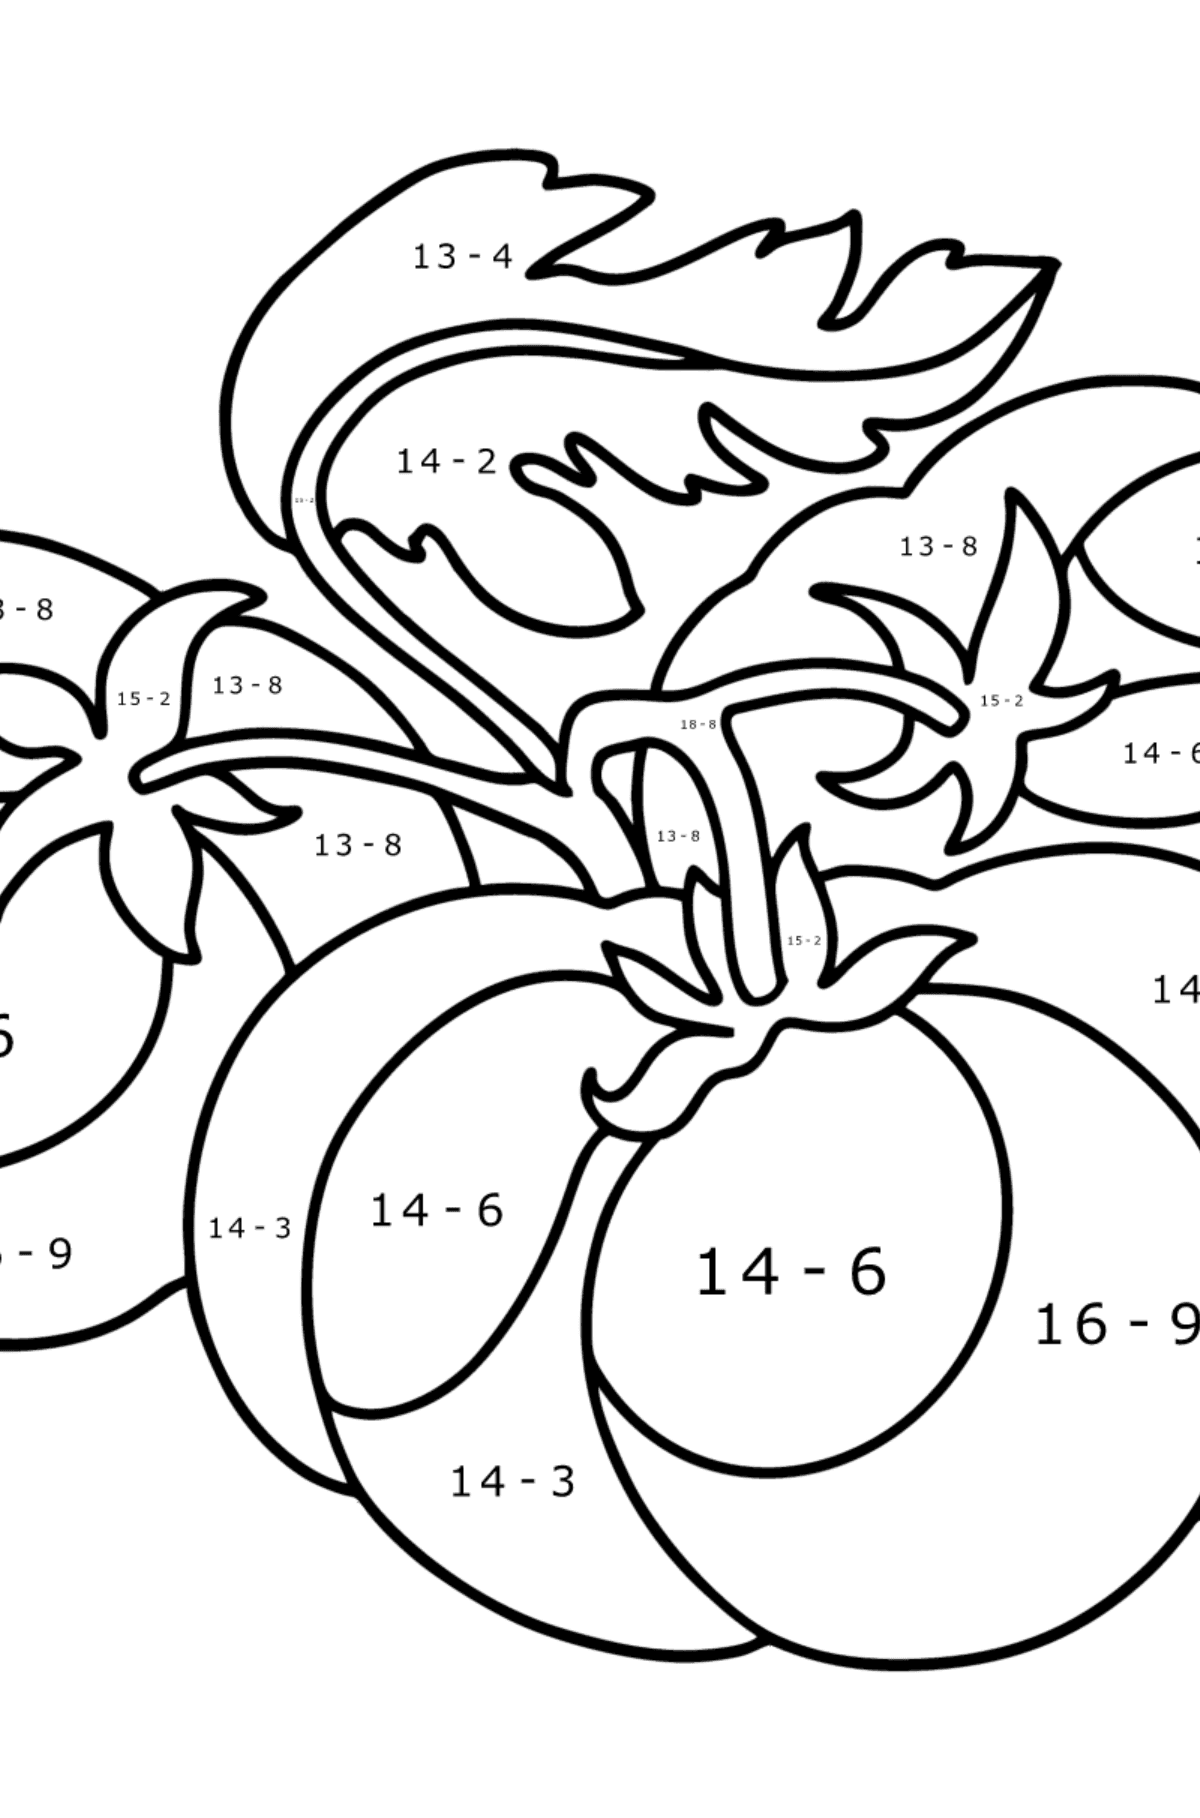 Large tomatoes сoloring page - Math Coloring - Subtraction for Kids